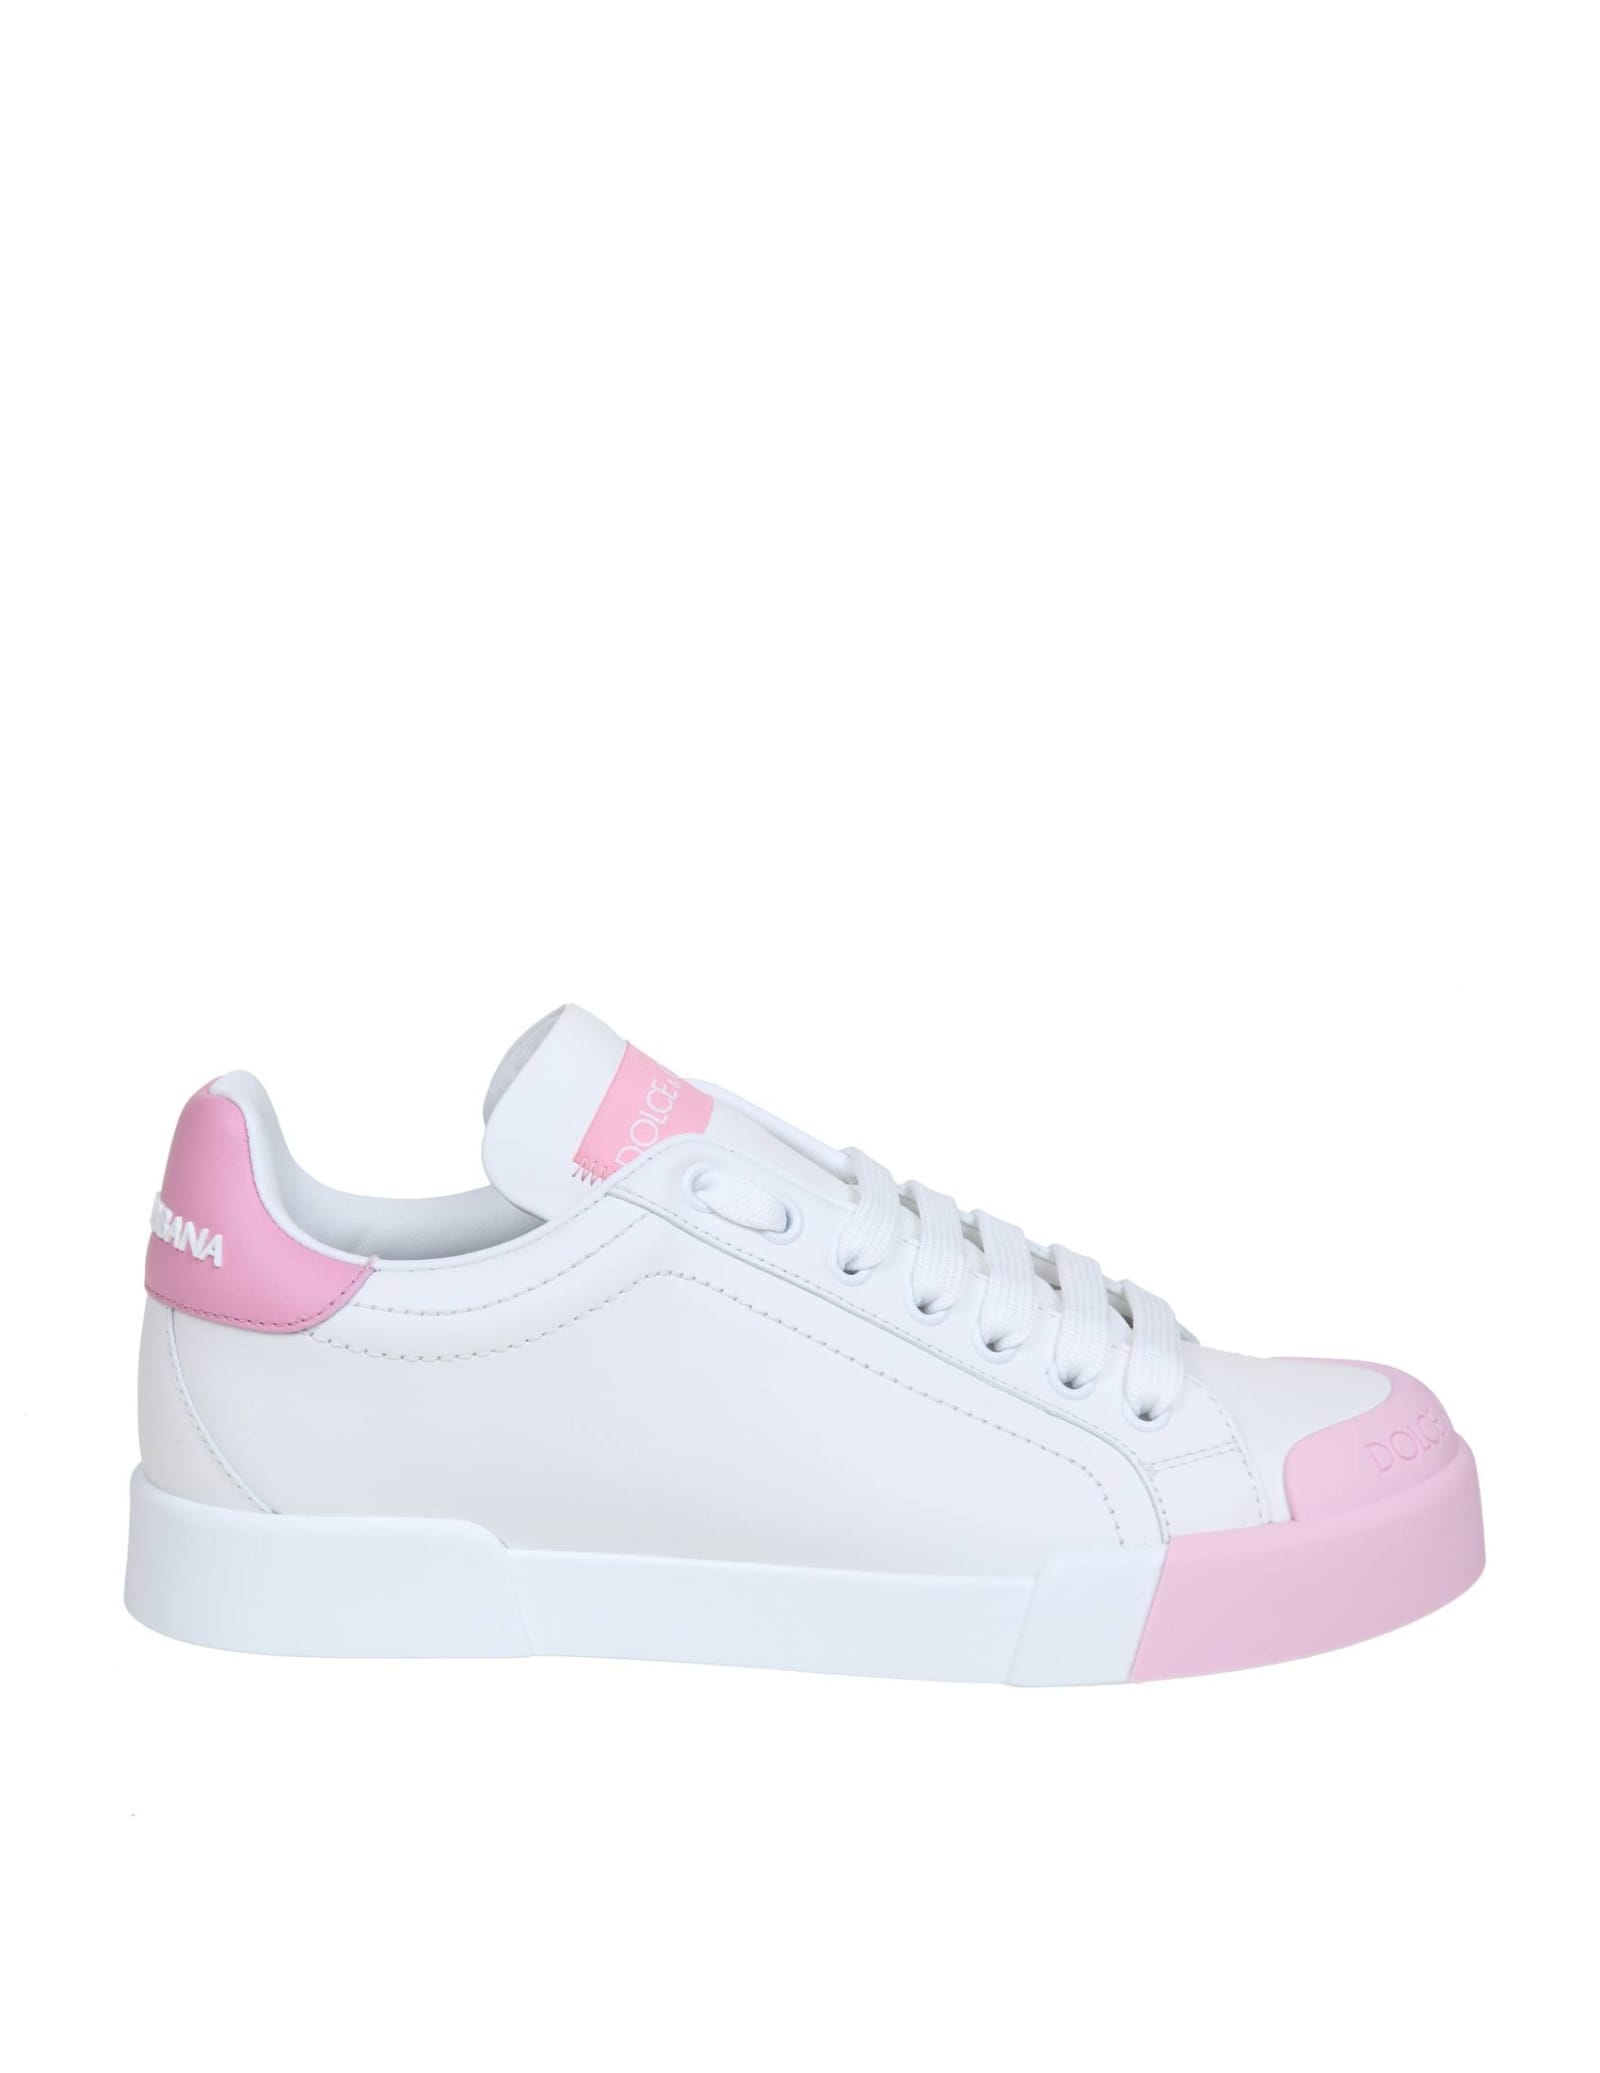 Buy Dolce & Gabbana Portofino Sneakers In White And Pink Leather online, shop Dolce & Gabbana shoes with free shipping